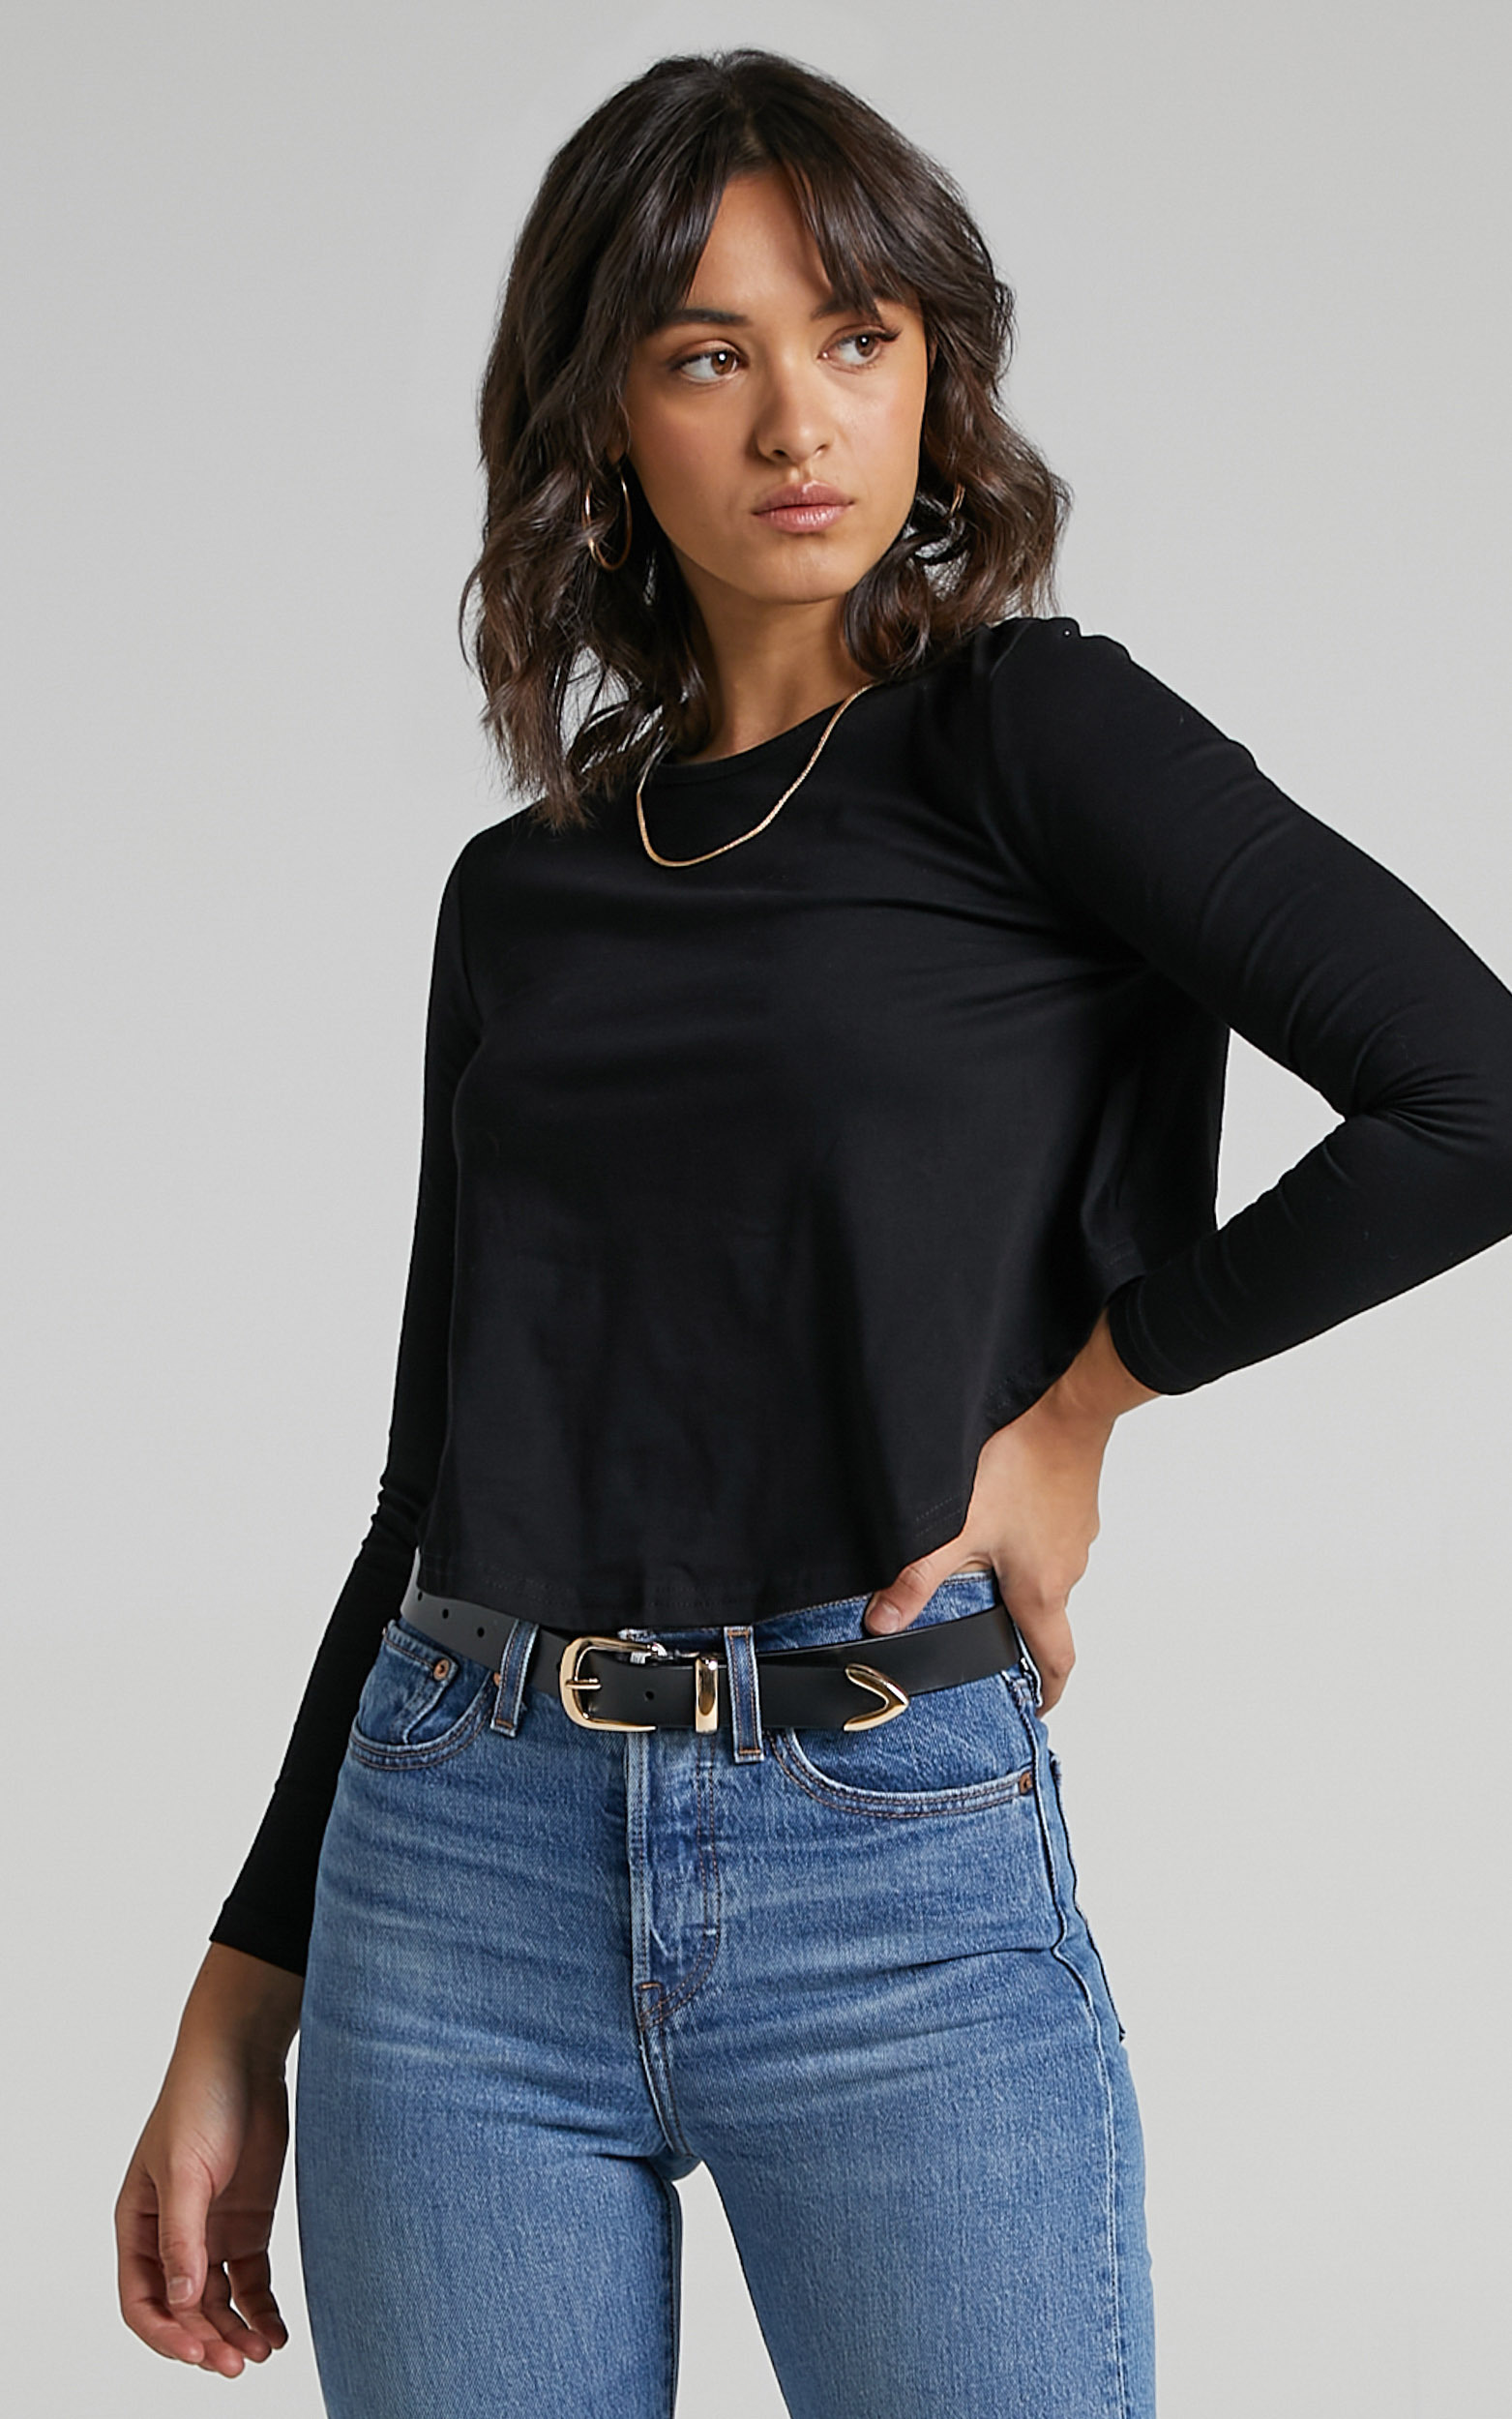 Zanna Top in Black - 14 (XL), Black, hi-res image number null